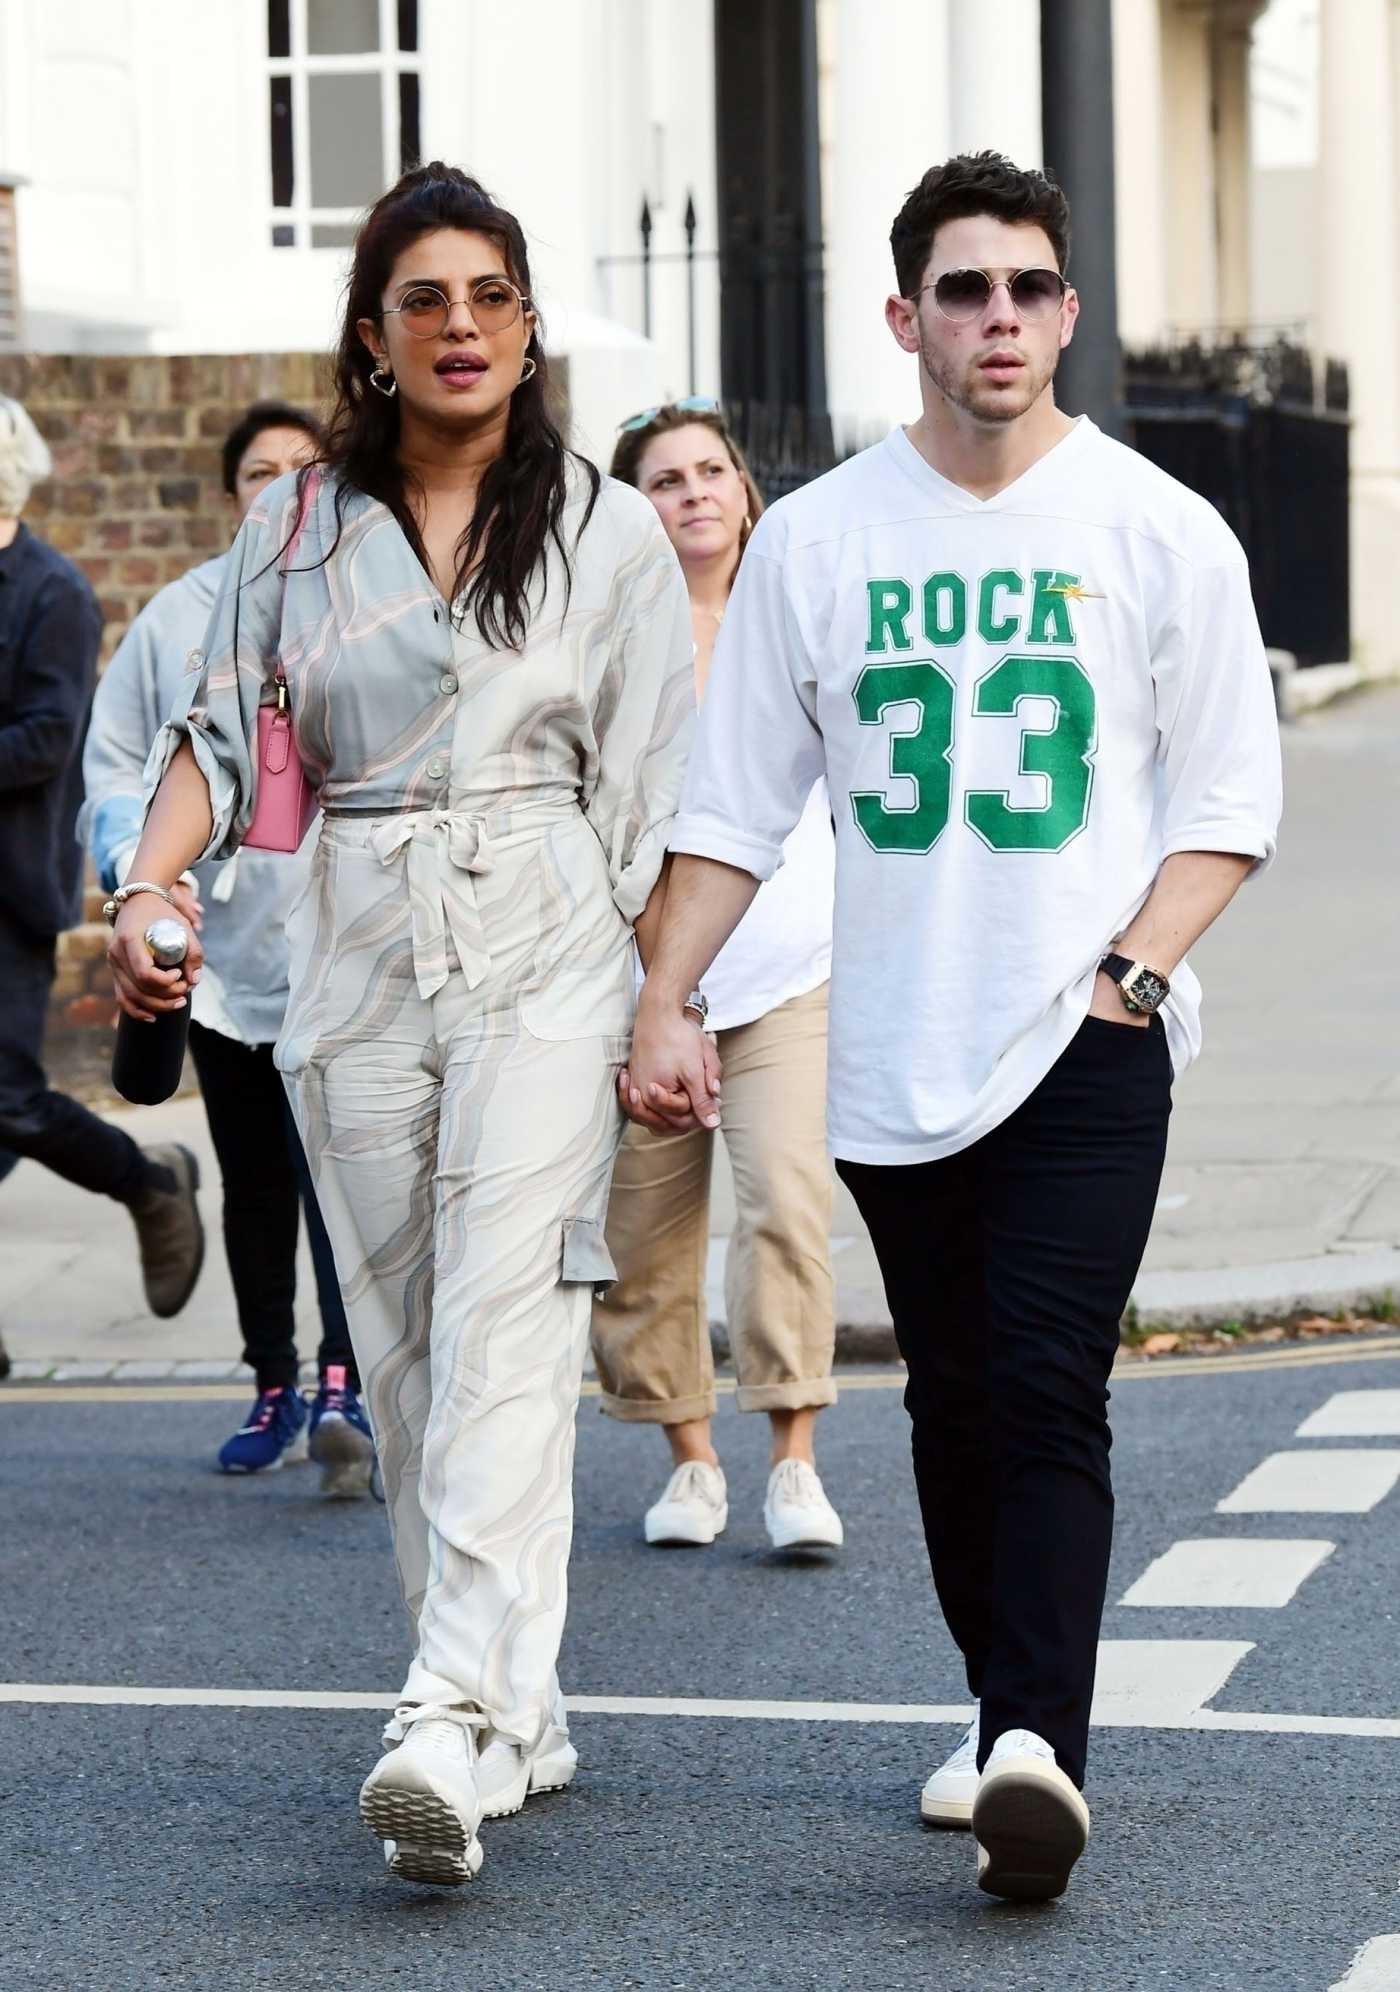 Nick Jonas in a White Long Sleeves T-Shirt Was Seen Out with Priyanka Chopra in London 08/13/2021